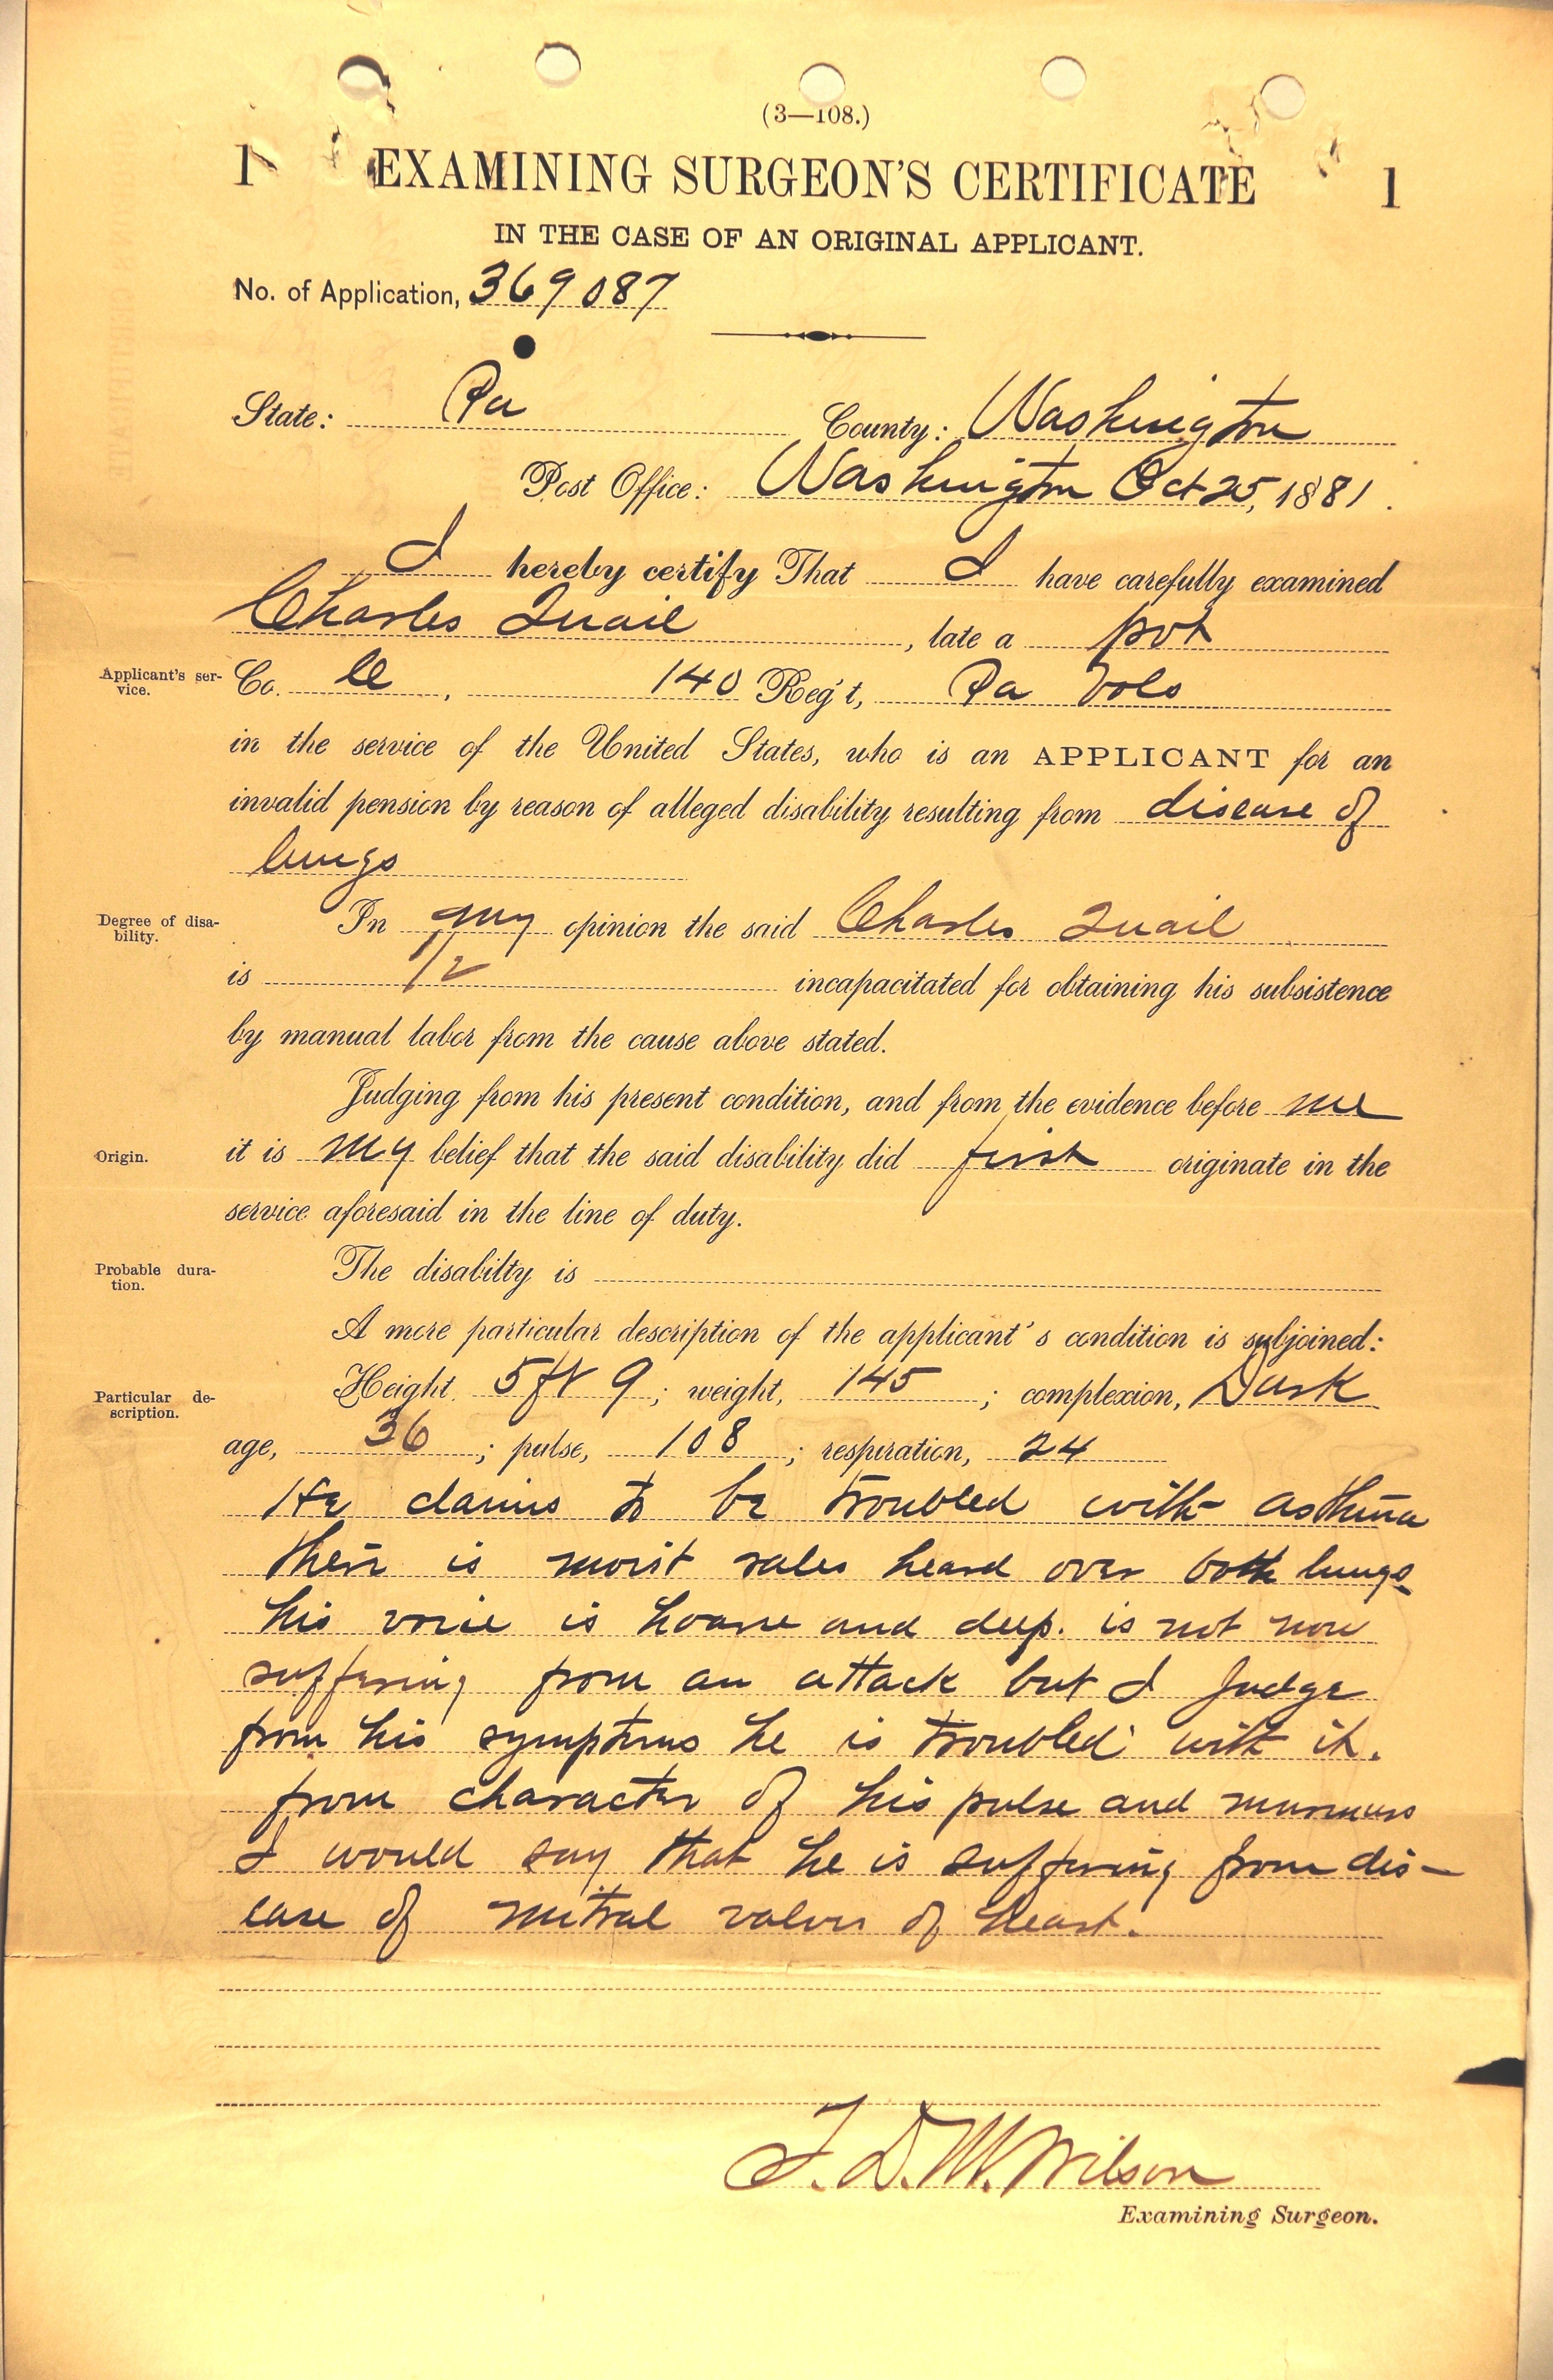 Image of a surgeon's certificate for Charles Quail's 1881 pension application